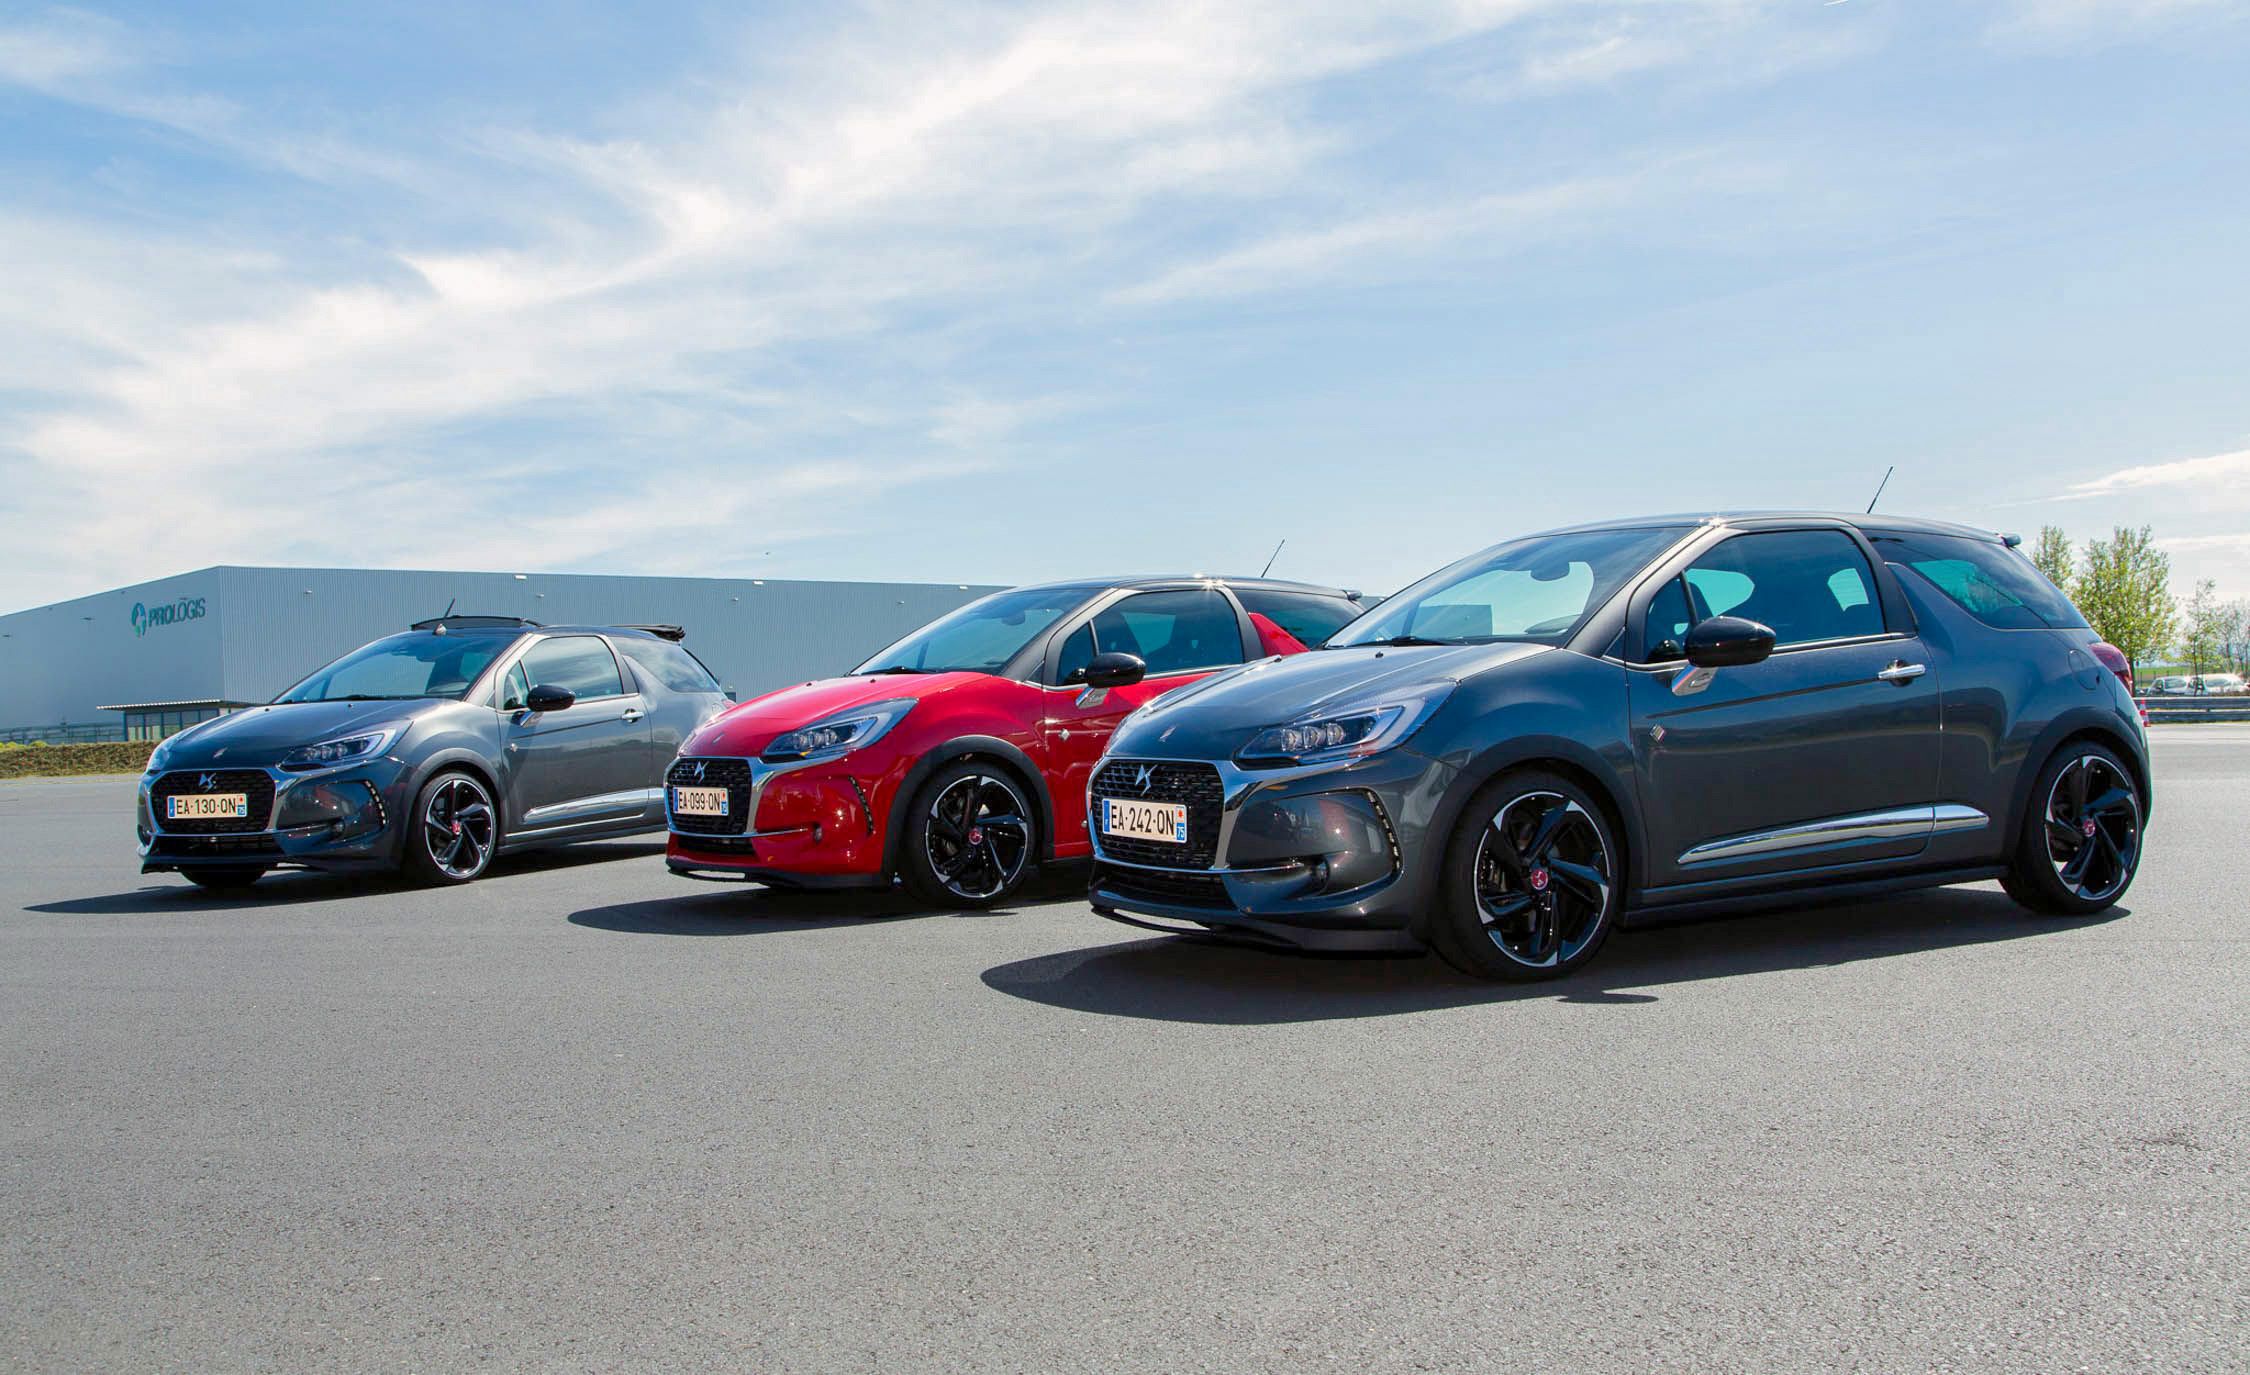 Citroën's DS 3 Is an French Small Hatchback